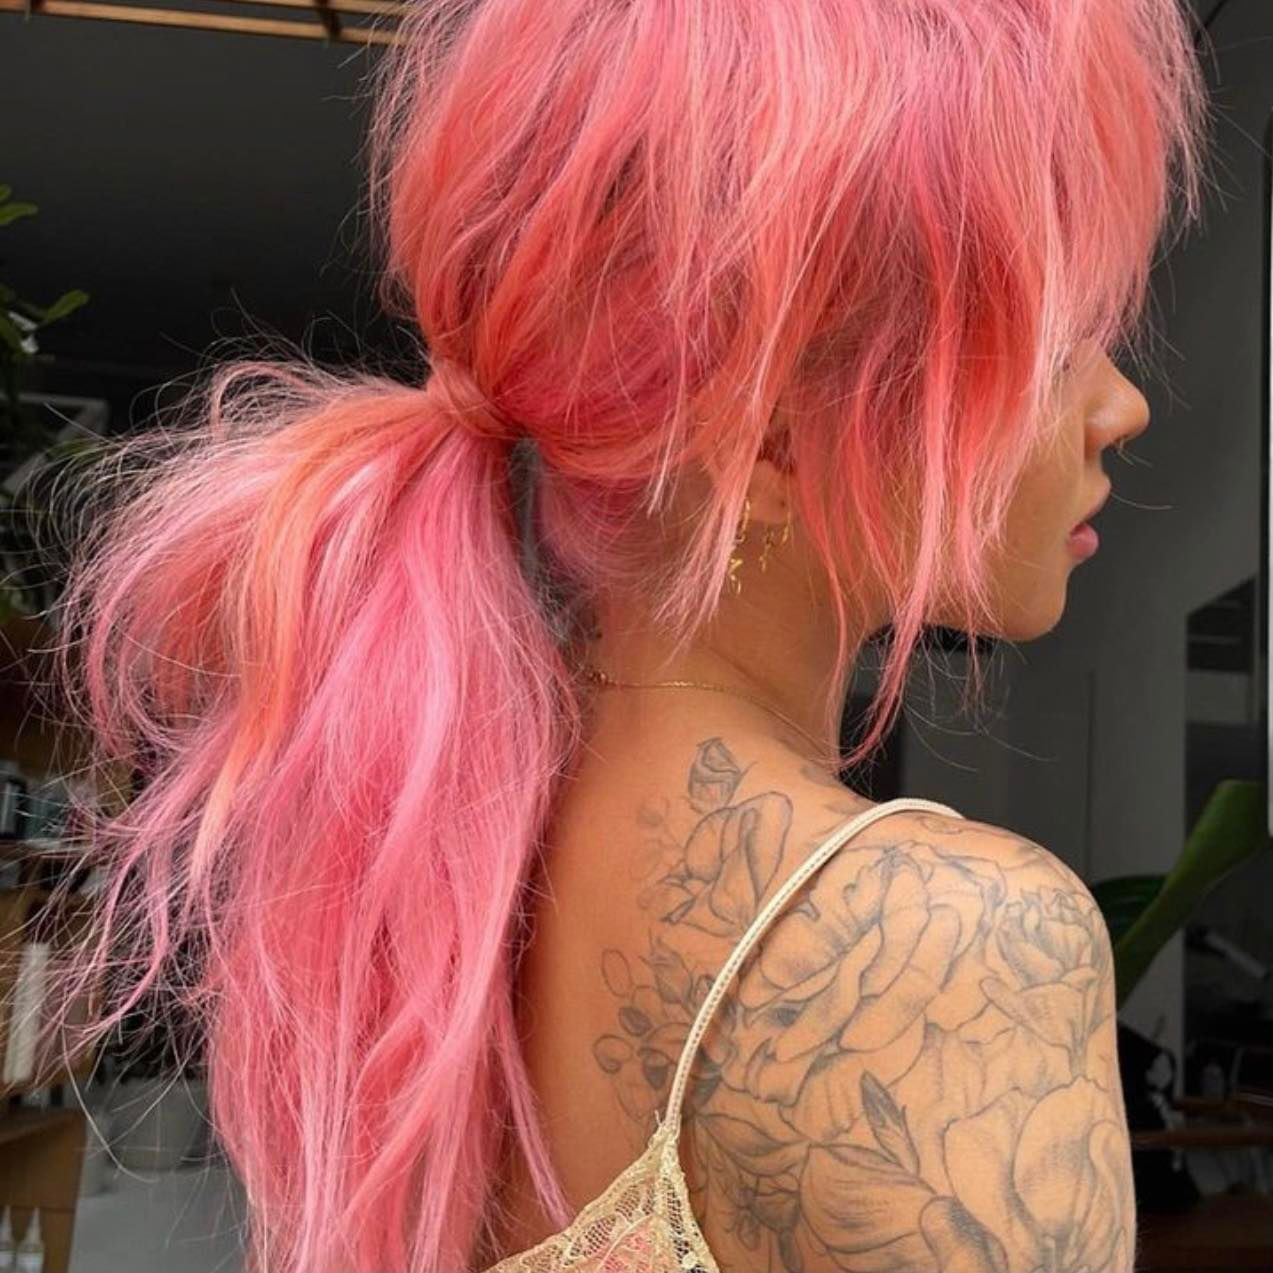 A Woman With Pink Hair Has a Tattoo on Her Back — Custom Hair Foils in Gosford, NSW